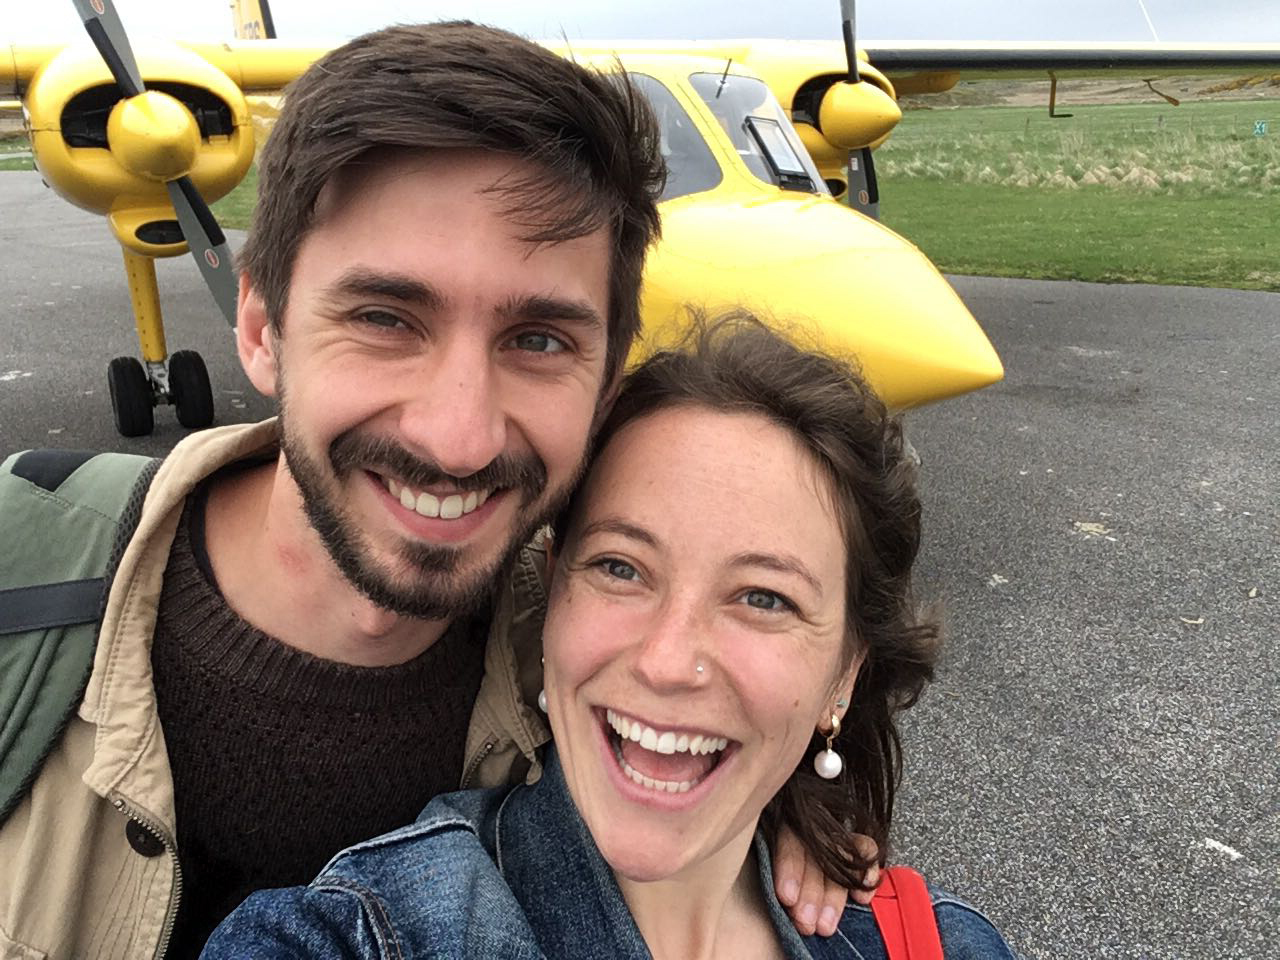 Hebridean Air Services (HAS) put on an extra service so the couple, Nicola Gurney and Mathieu Willcocks, both 29, could reach the mainland for their flight